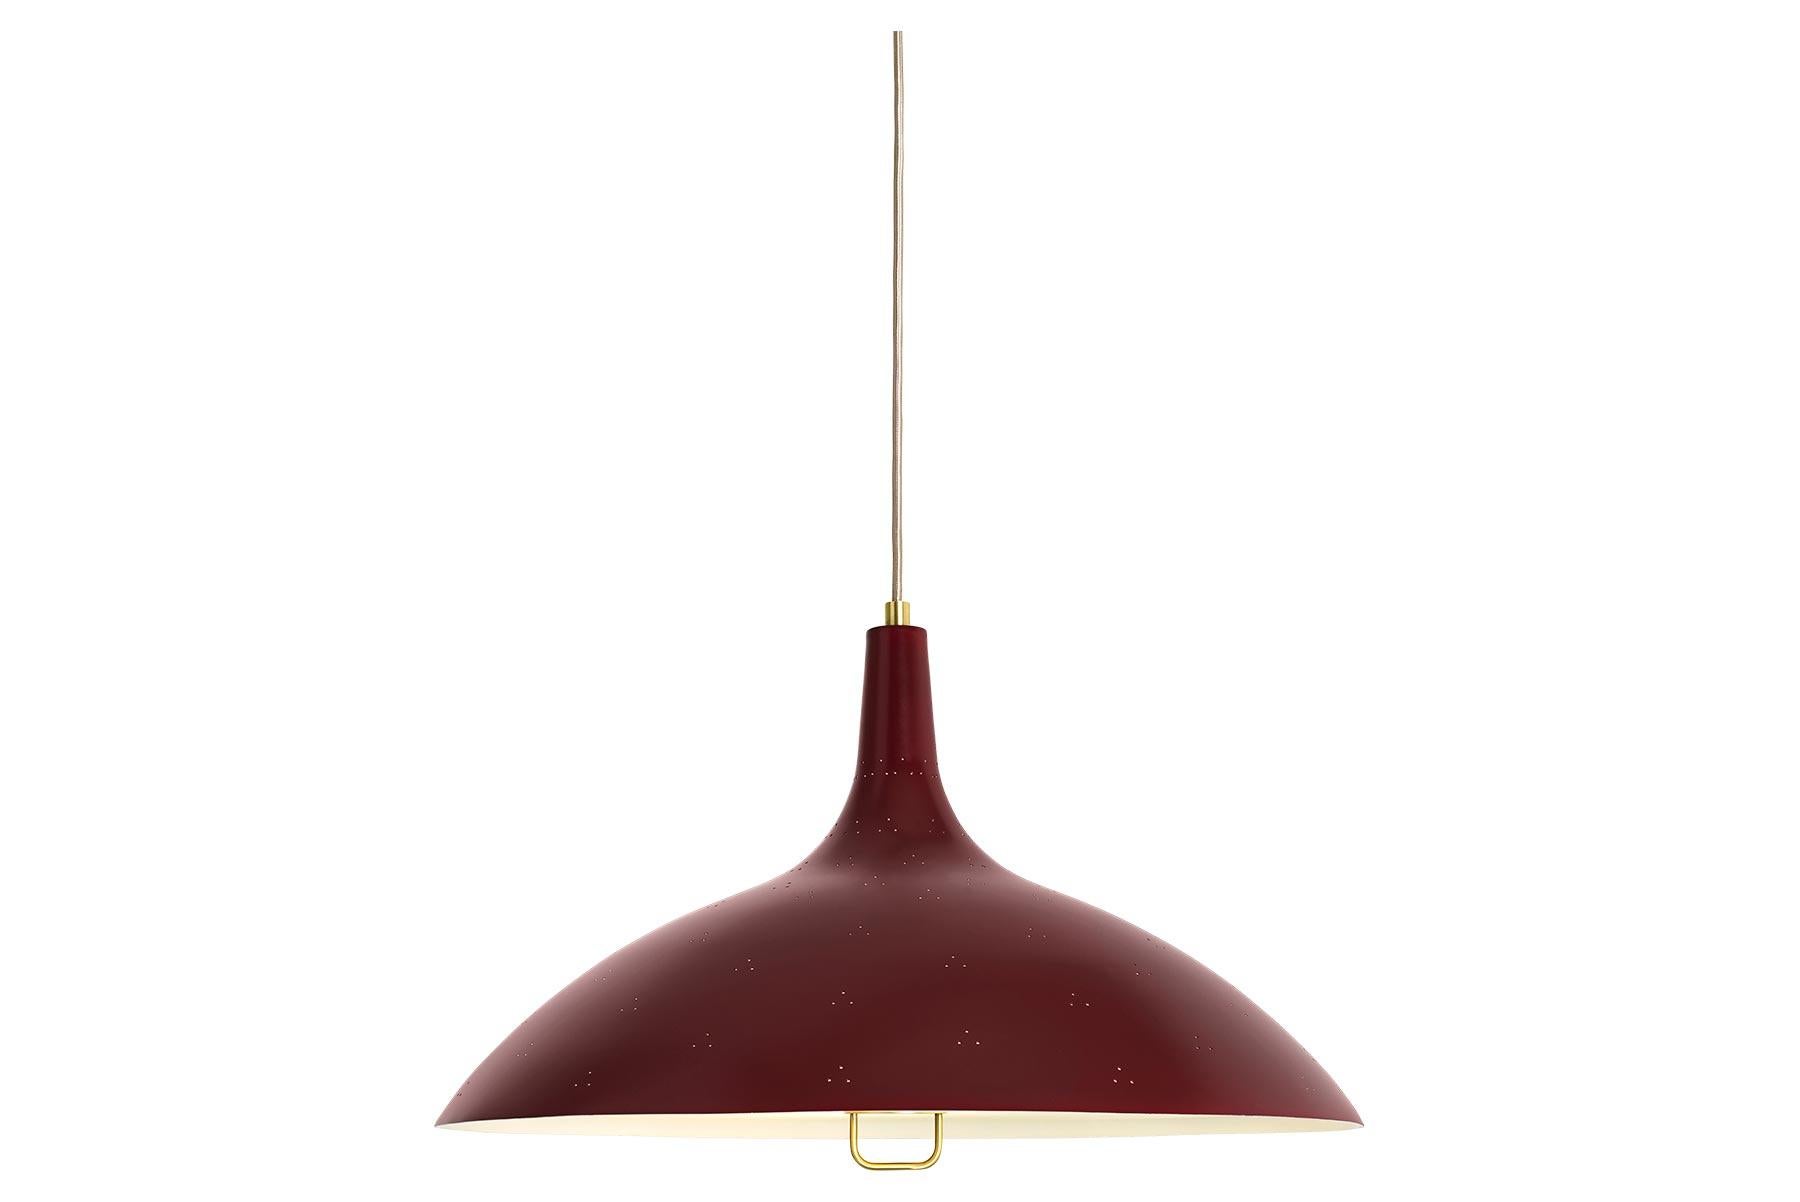 Danois Lampes suspendues Paavo Tynell 1965, blanches en vente